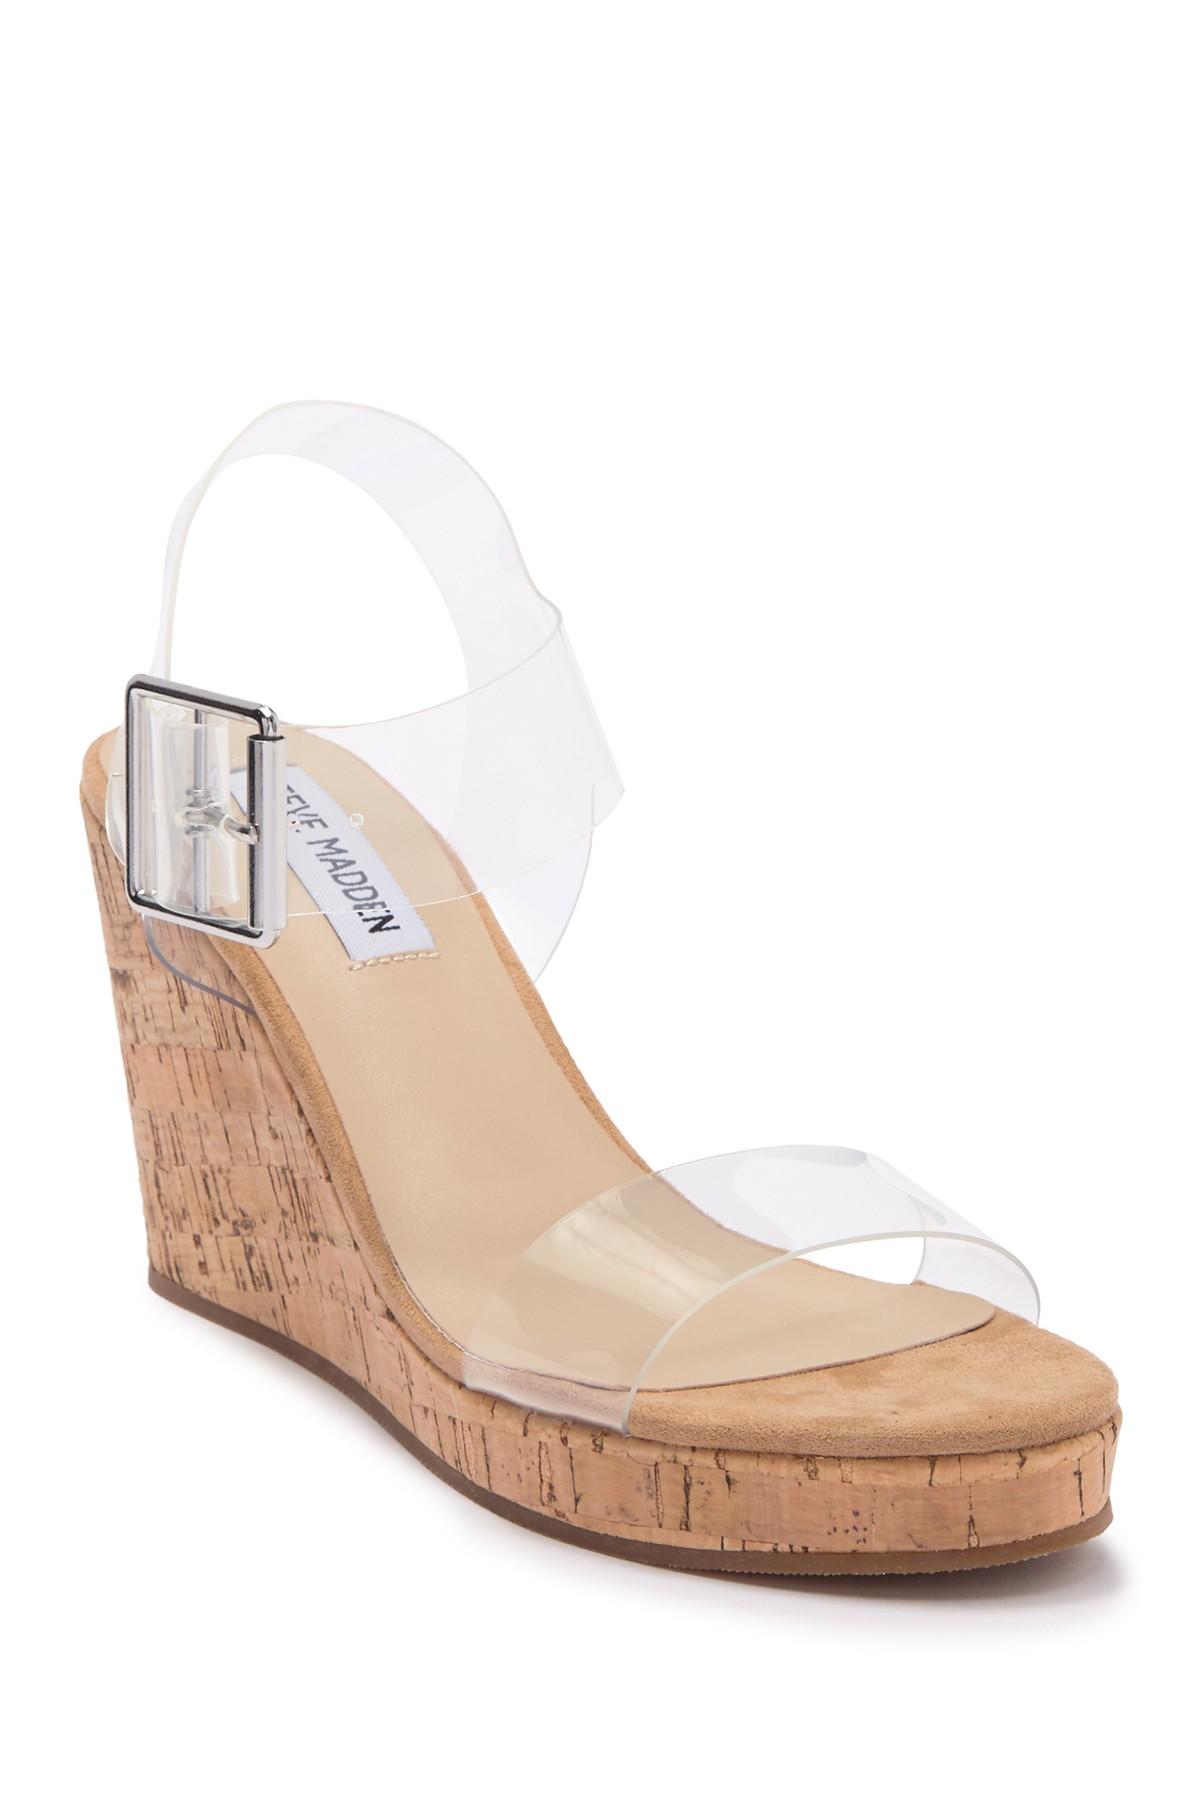 Steve Madden Clear Wedge Sandals Discount, SAVE 30% - lutheranems.com